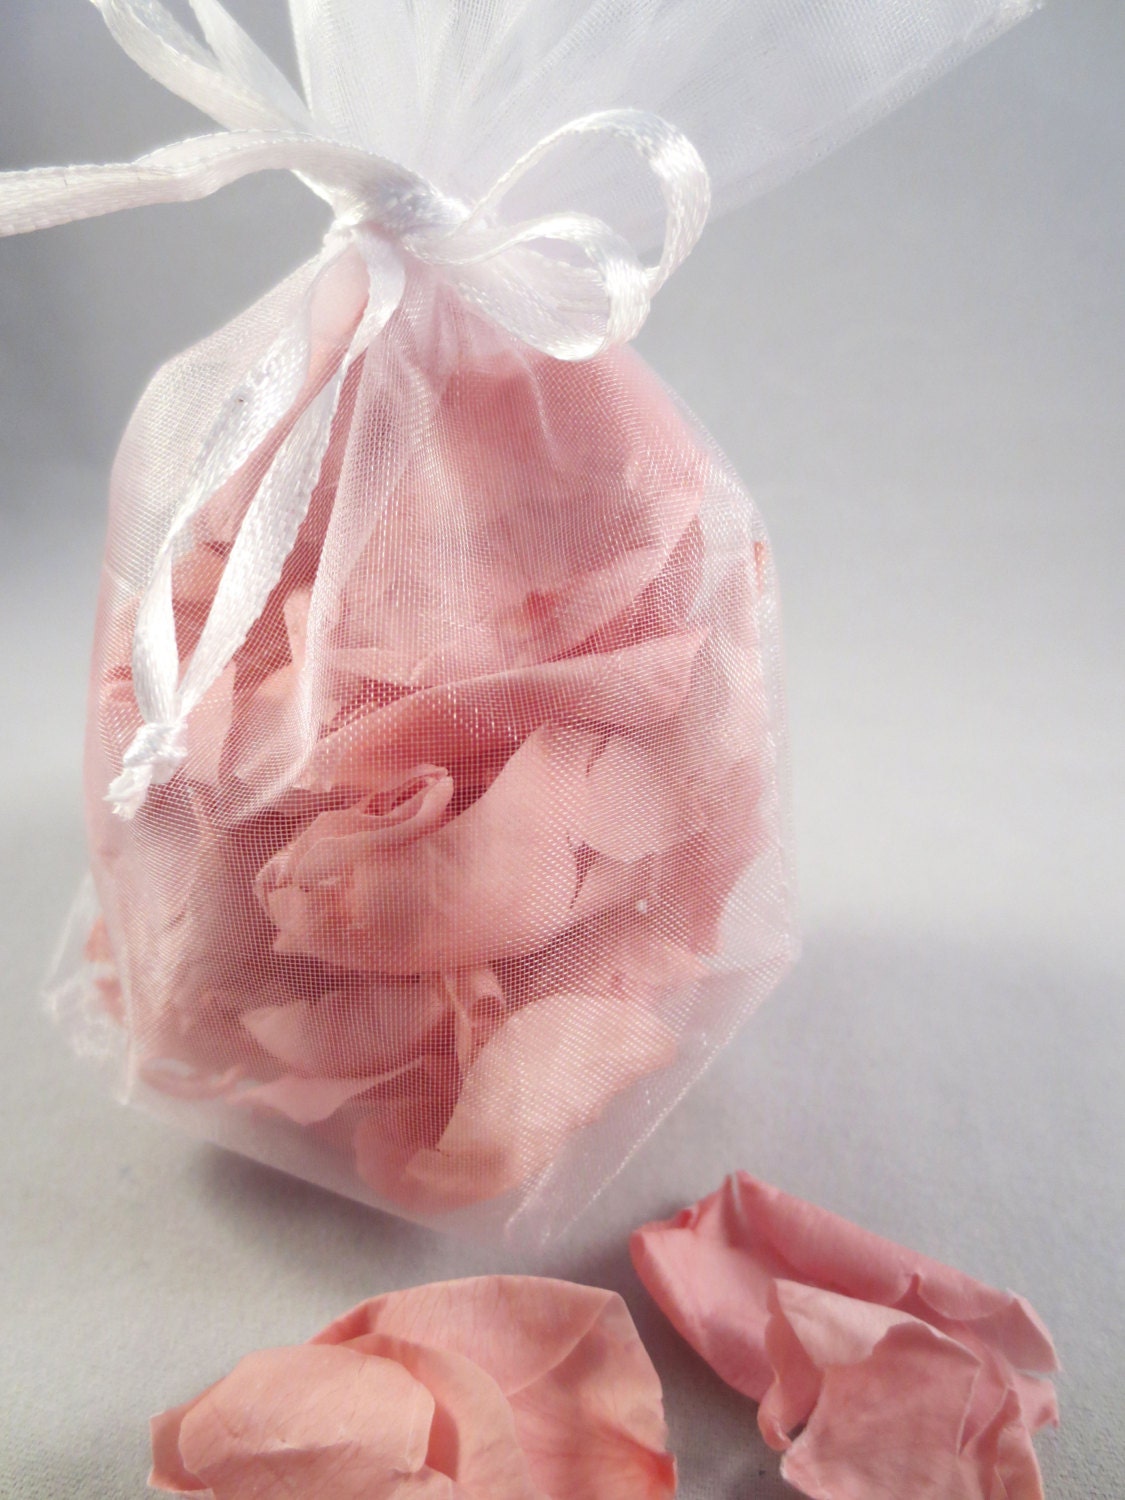 15 White Organza Bags full with Smoky Pink Preserved Rose Petals